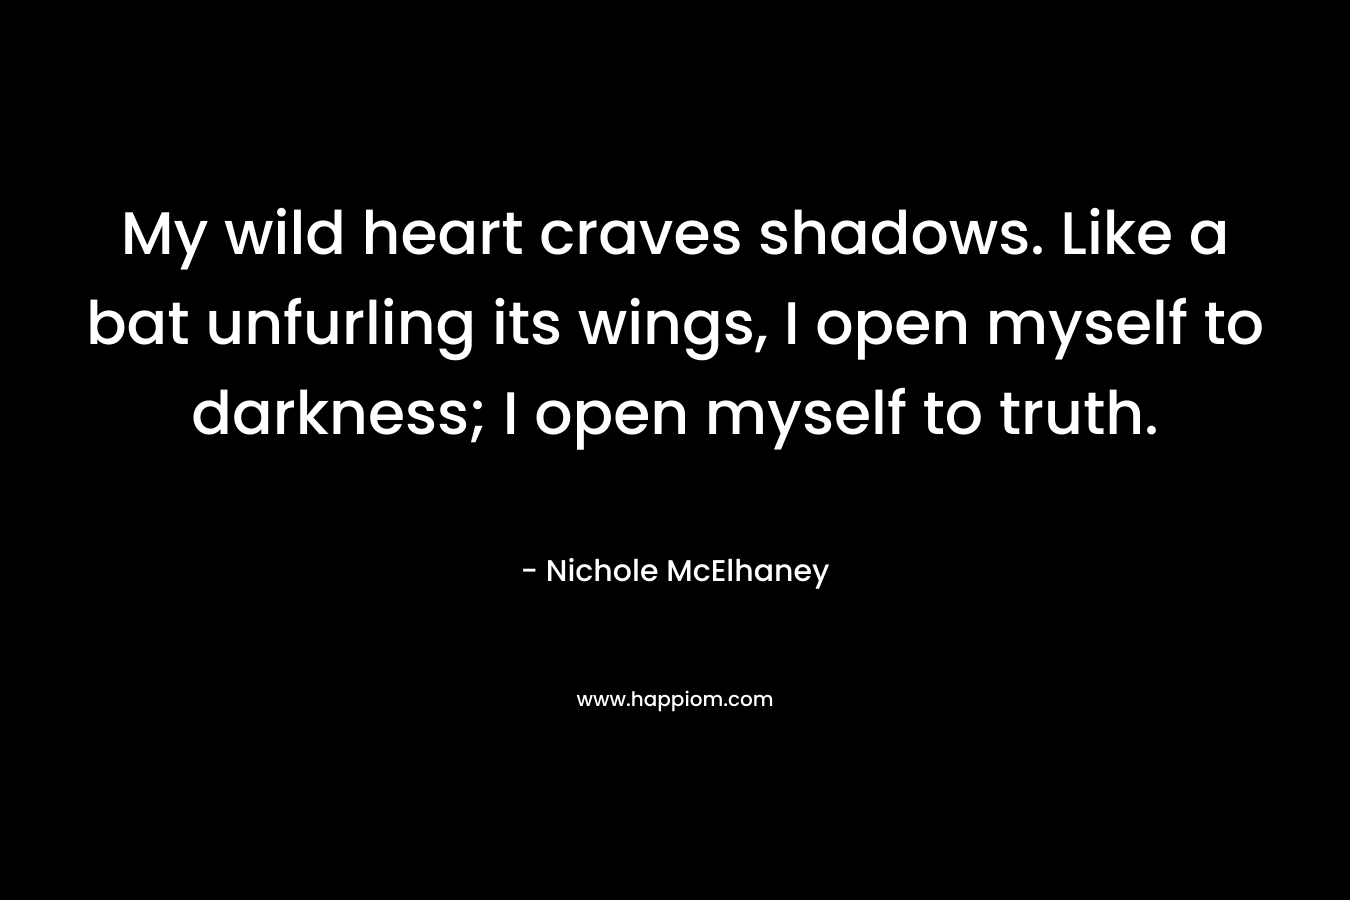 My wild heart craves shadows. Like a bat unfurling its wings, I open myself to darkness; I open myself to truth.